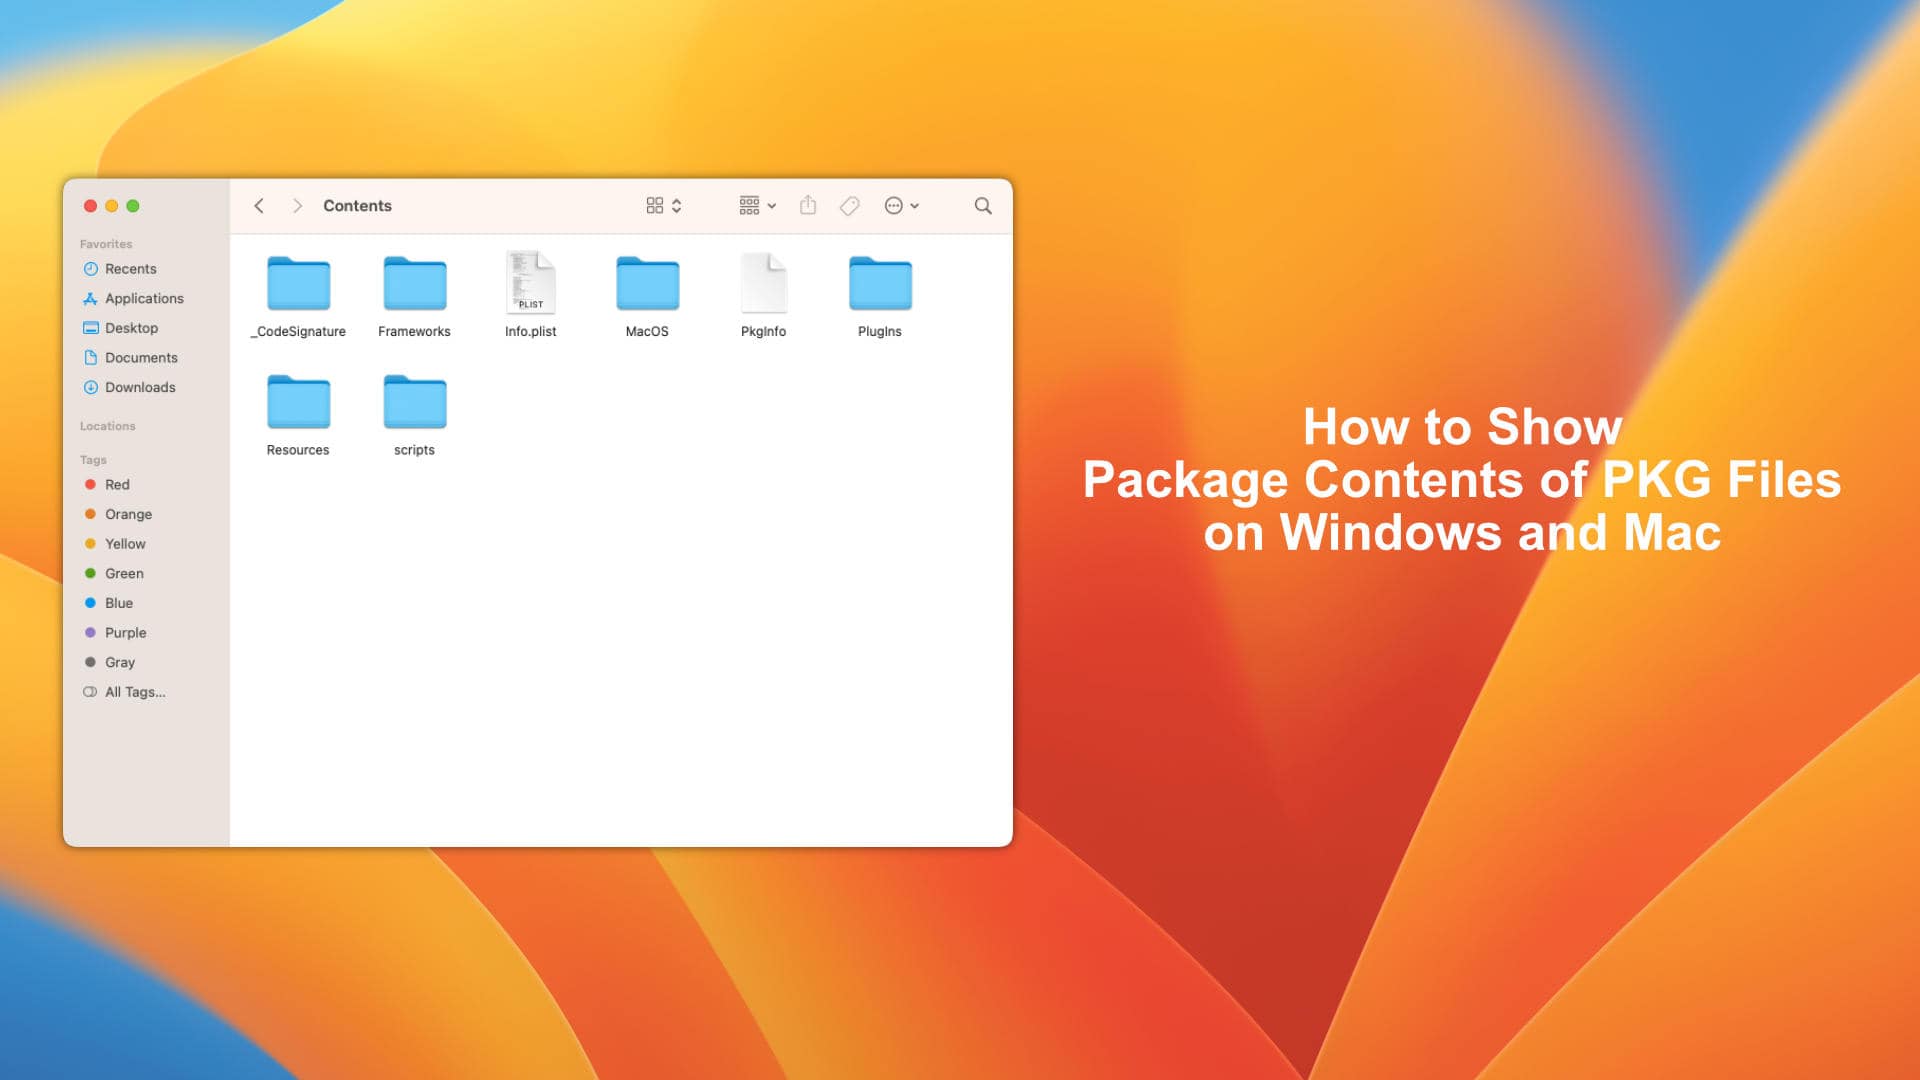 How to Open Package Contents of PKG Files on Windows and Mac